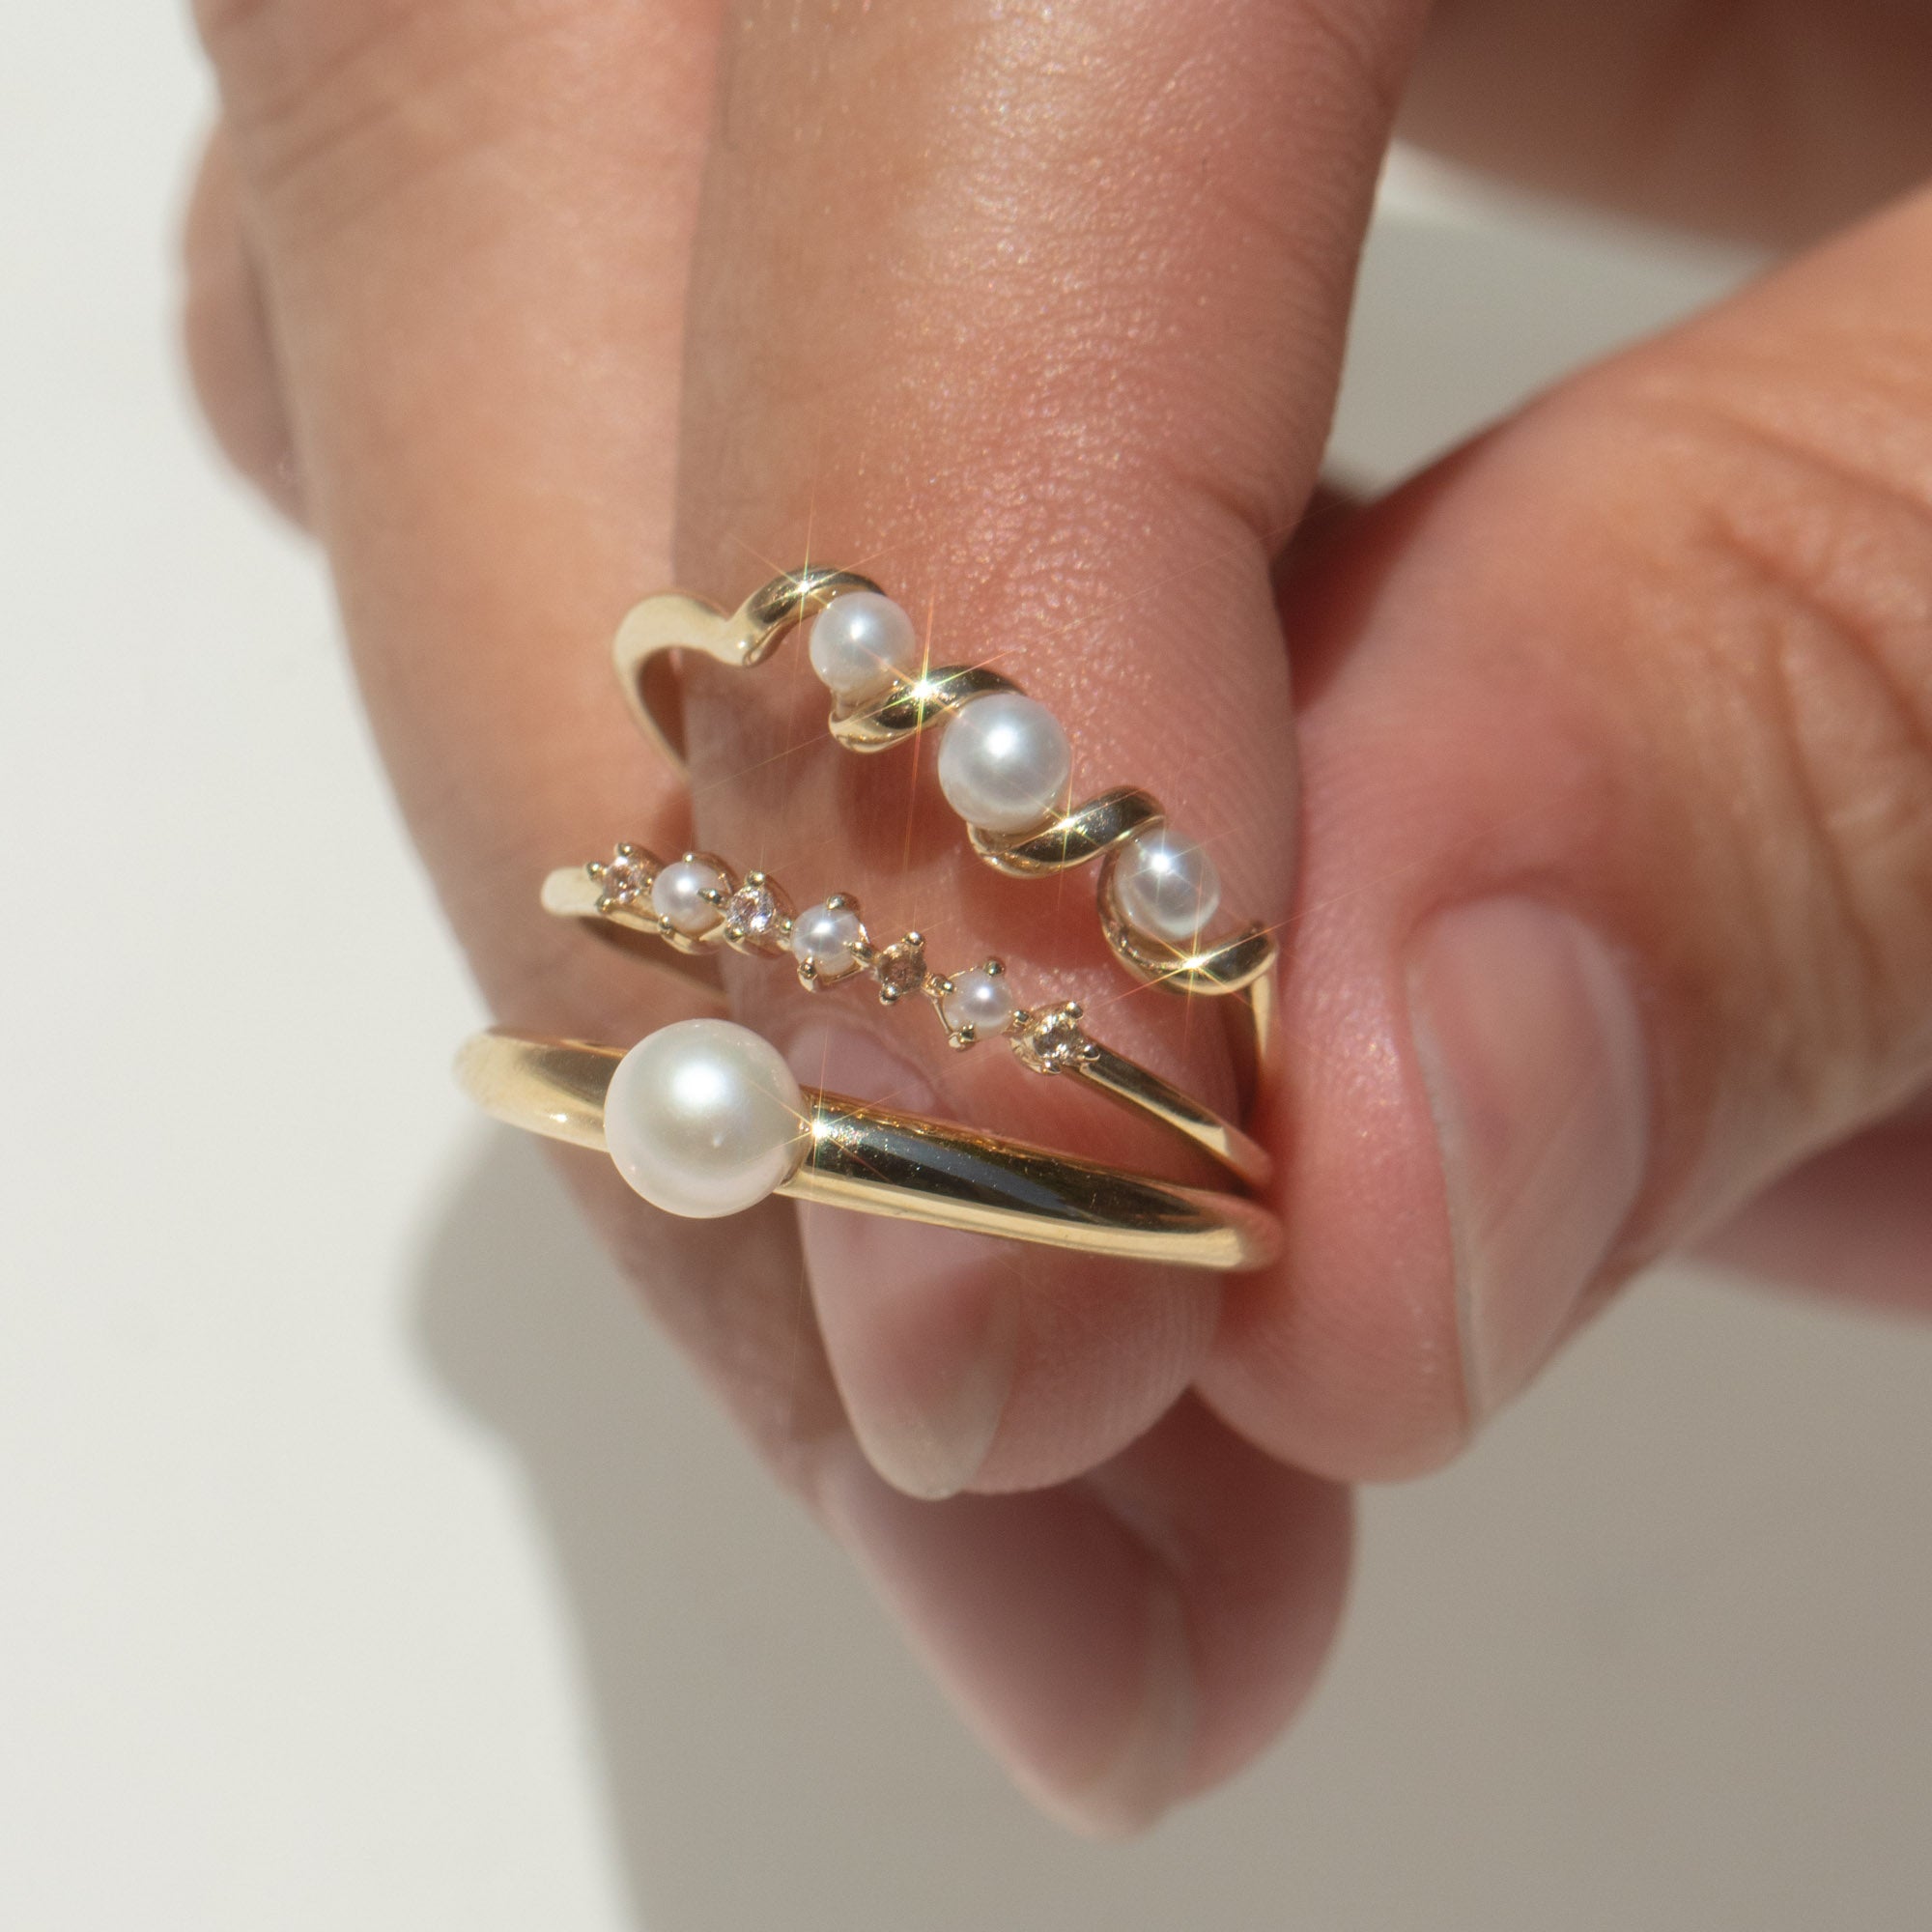 22K Gold Ring For Women with Pearl - 235-GR6125 in 3.050 Grams